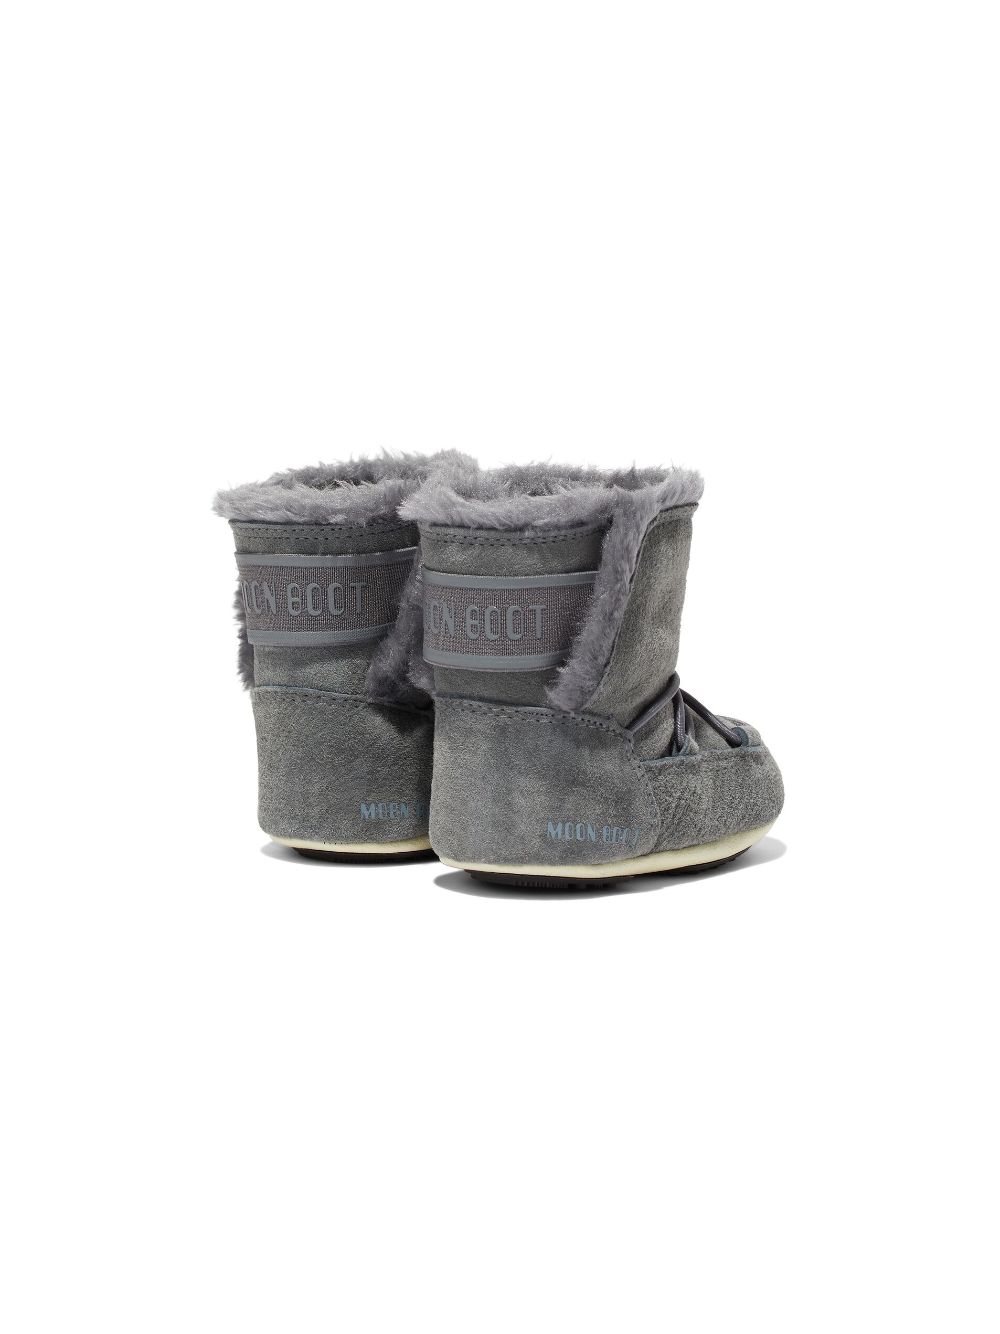 MOON BOOT CRIB SUEDE